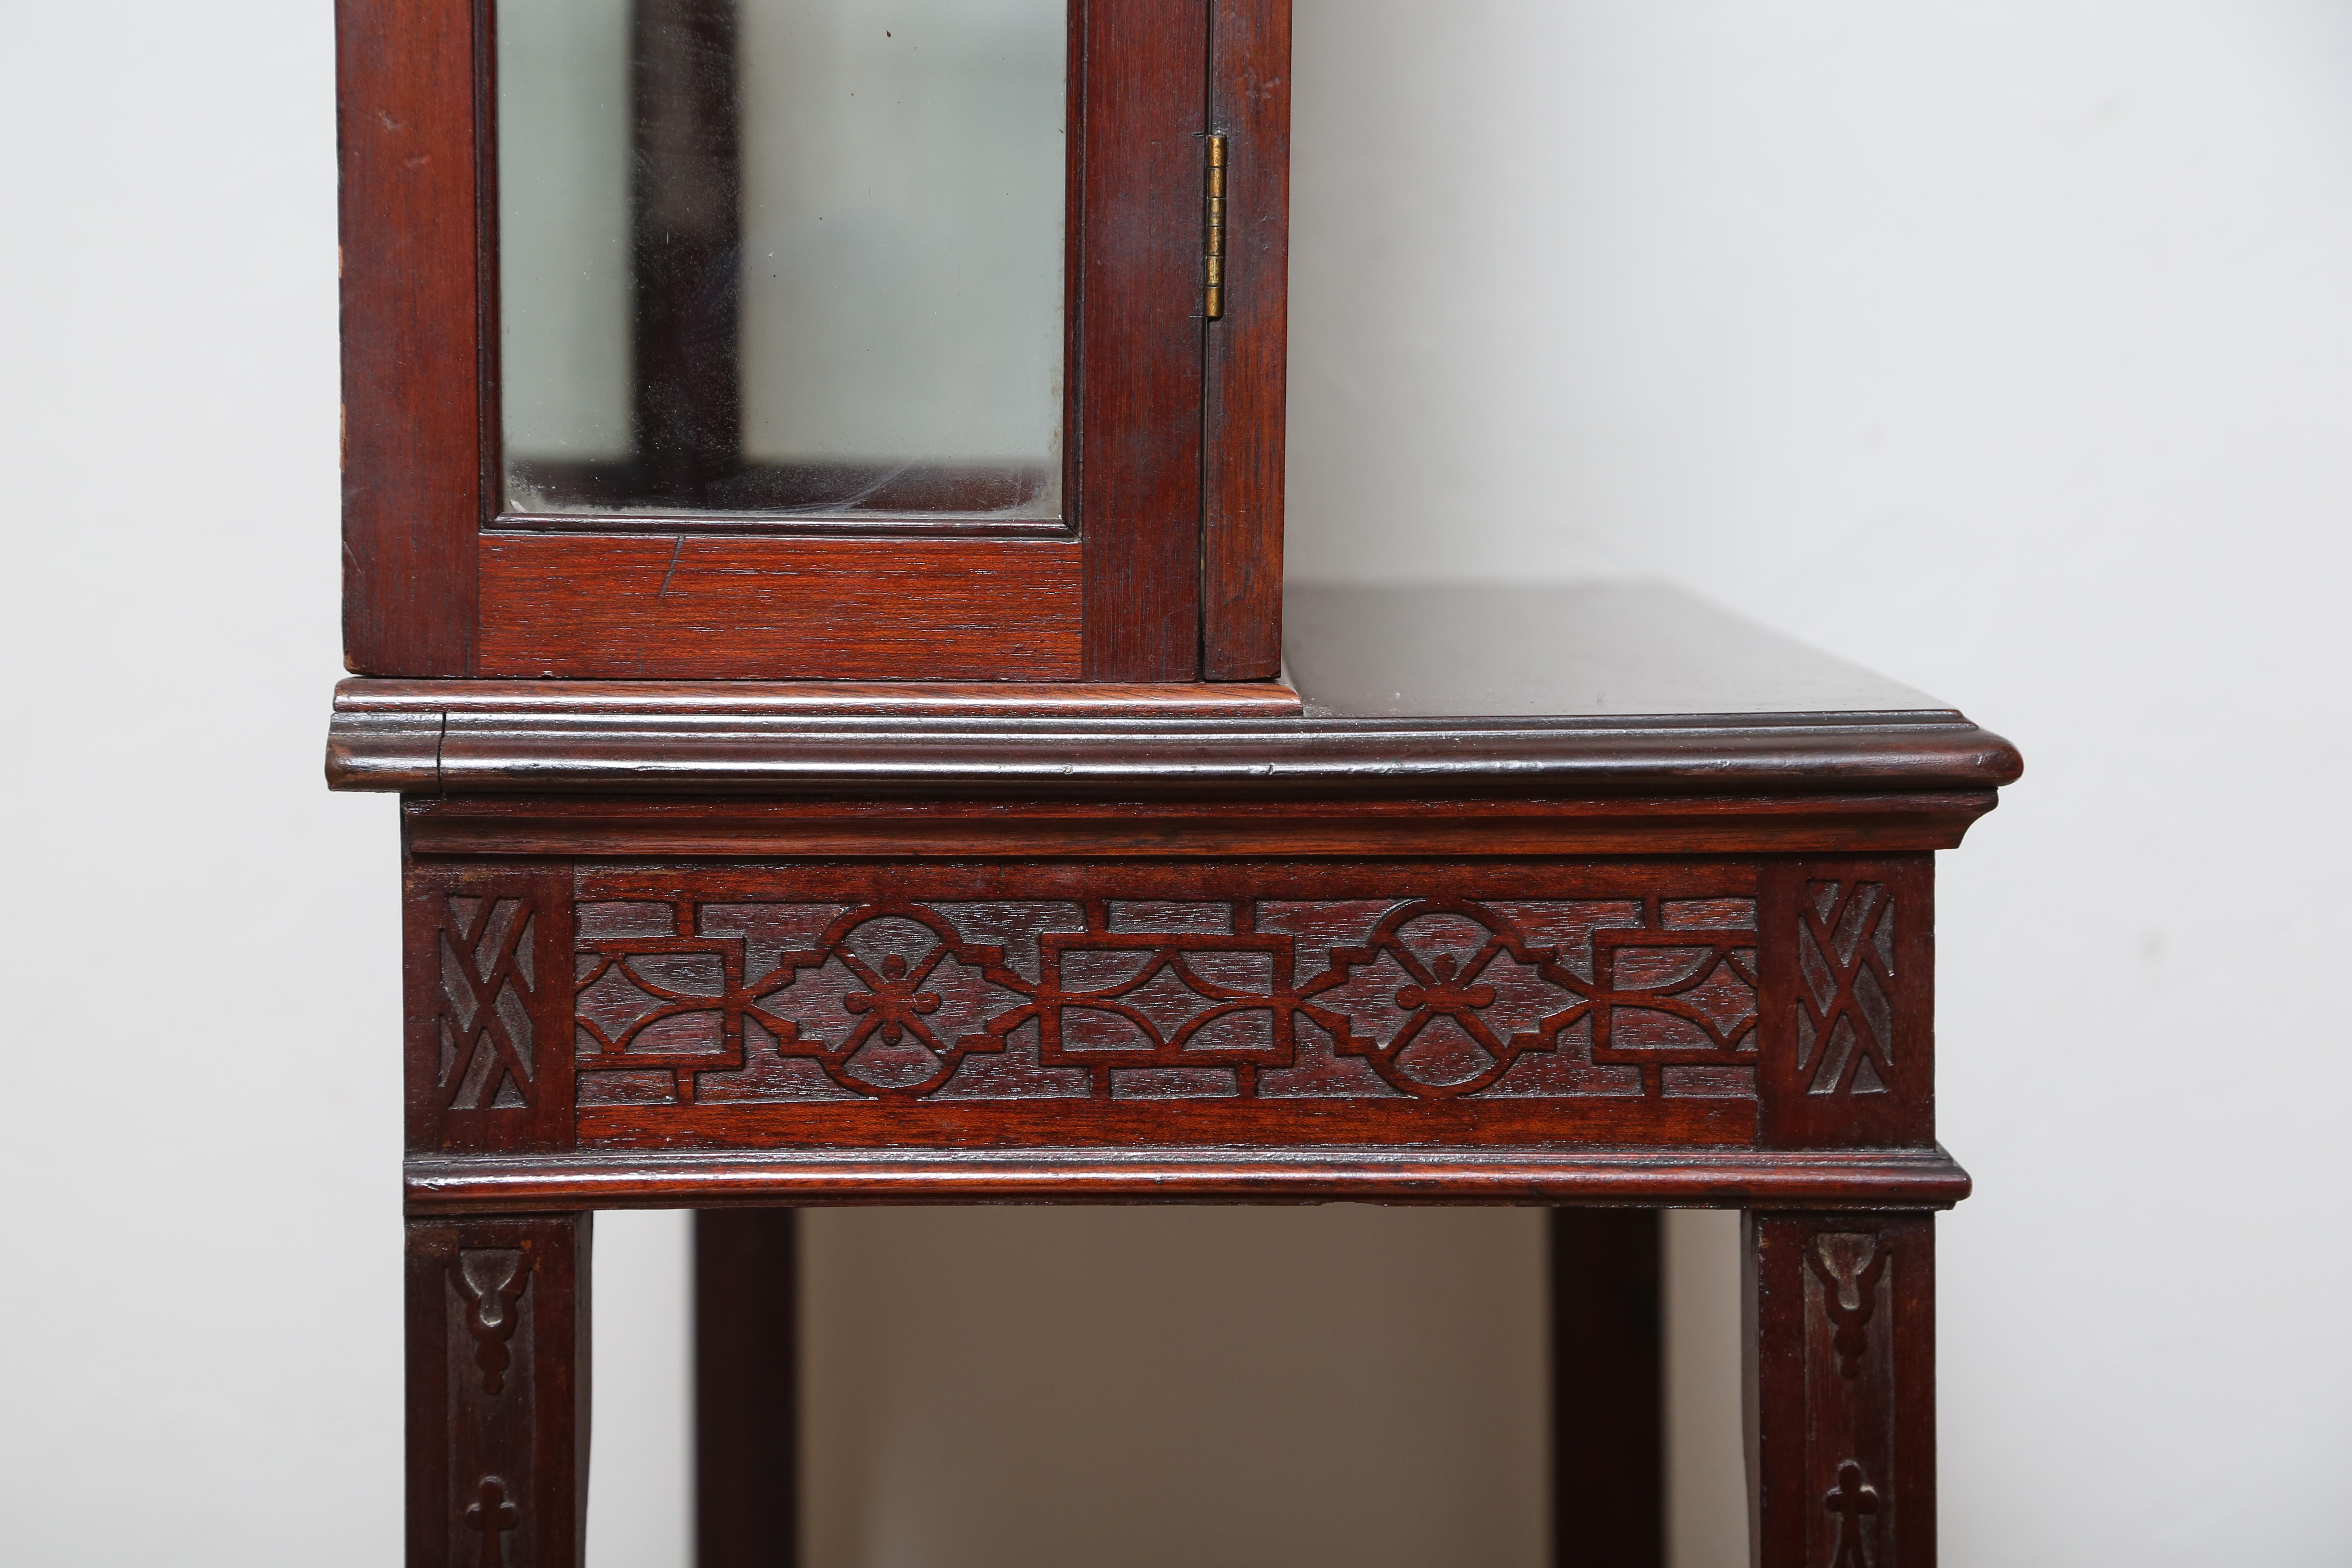 19th century Chinese Chippendale style display cabinet. Beautiful detail with three glass shelves plus the bottom shelf. Fitted with one drawer and bottom outside shelf. Interior illuminates. Topped with a pediment.